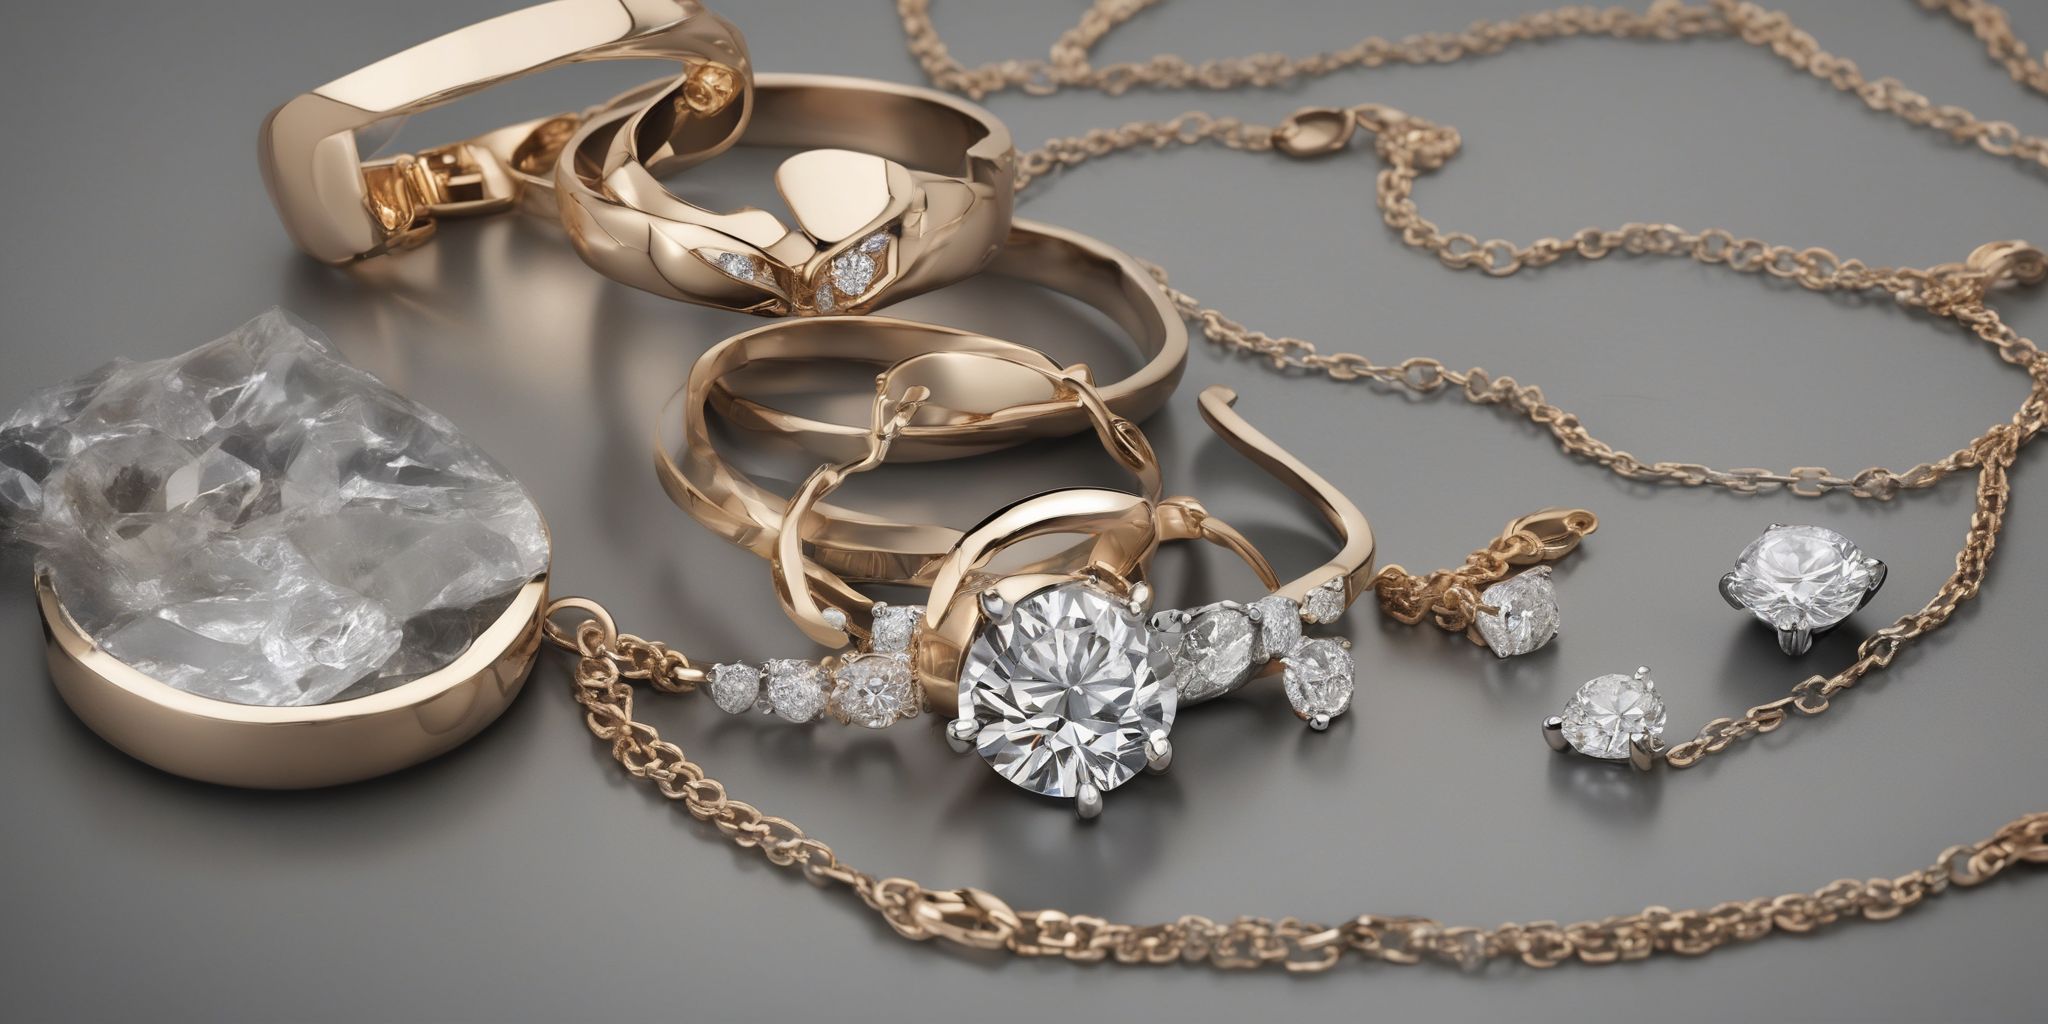 Collateral jewelry  in realistic, photographic style